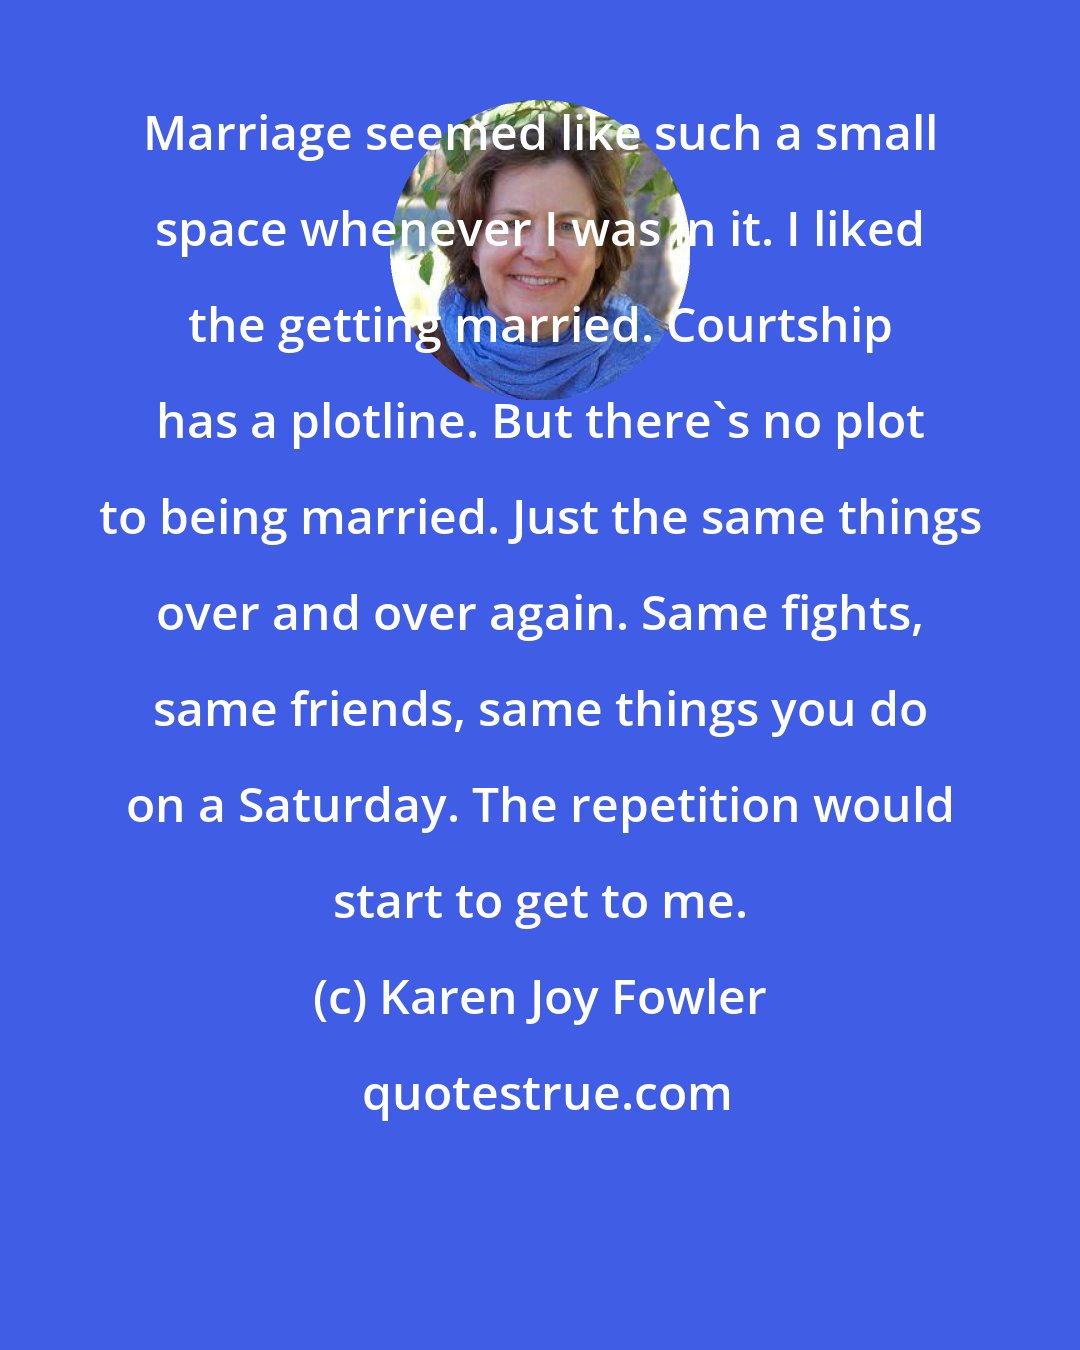 Karen Joy Fowler: Marriage seemed like such a small space whenever I was in it. I liked the getting married. Courtship has a plotline. But there's no plot to being married. Just the same things over and over again. Same fights, same friends, same things you do on a Saturday. The repetition would start to get to me.